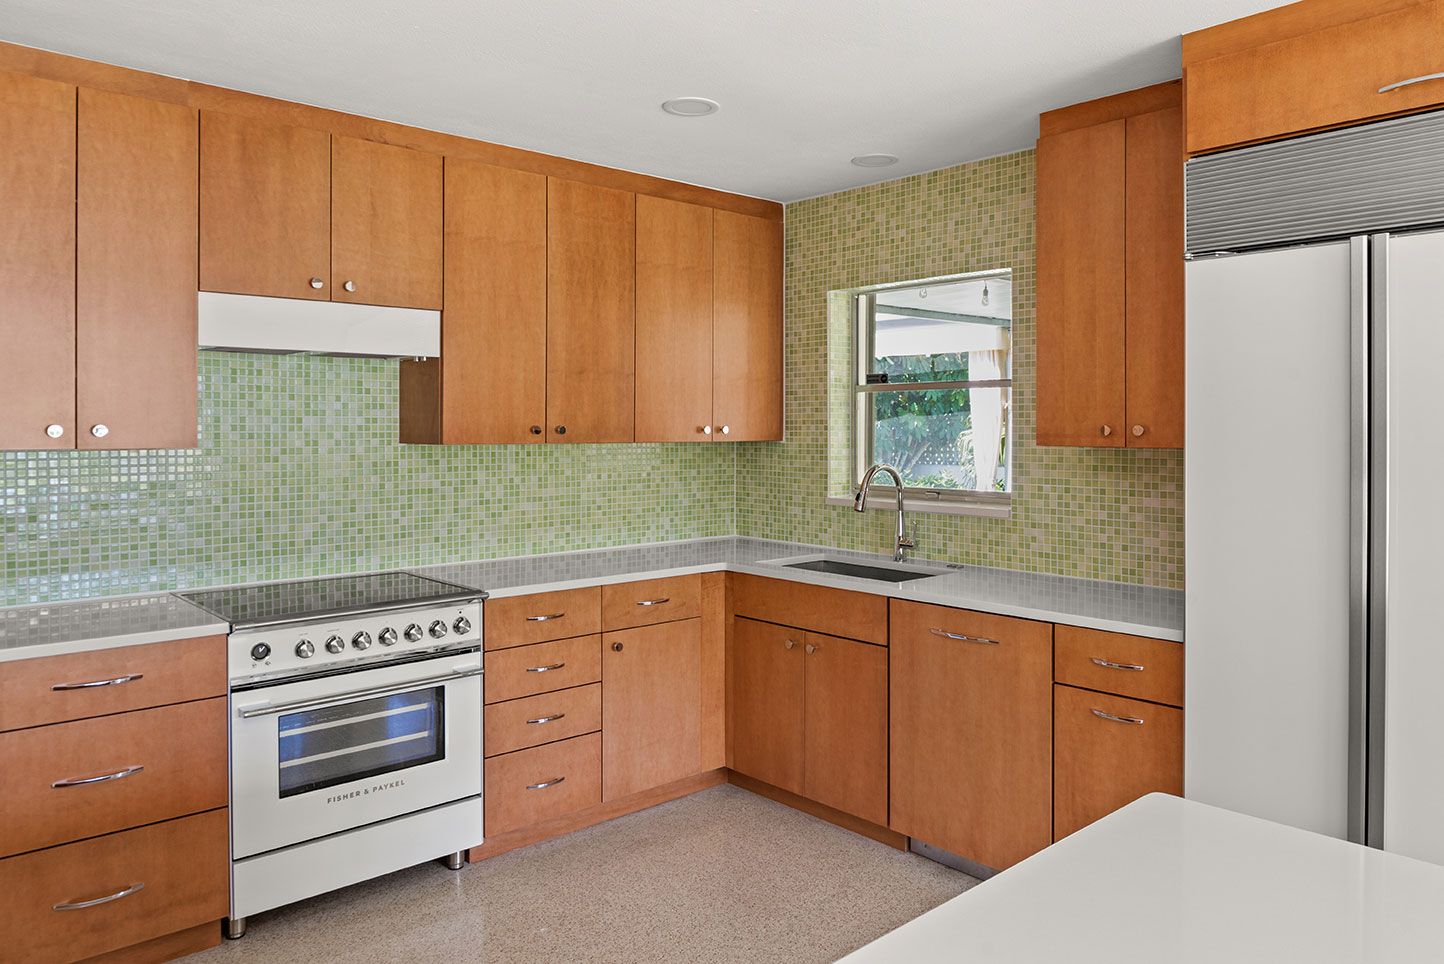 modern kitchen remodel featuring green backsplash and warm wood cabinets in brevard county, fl 